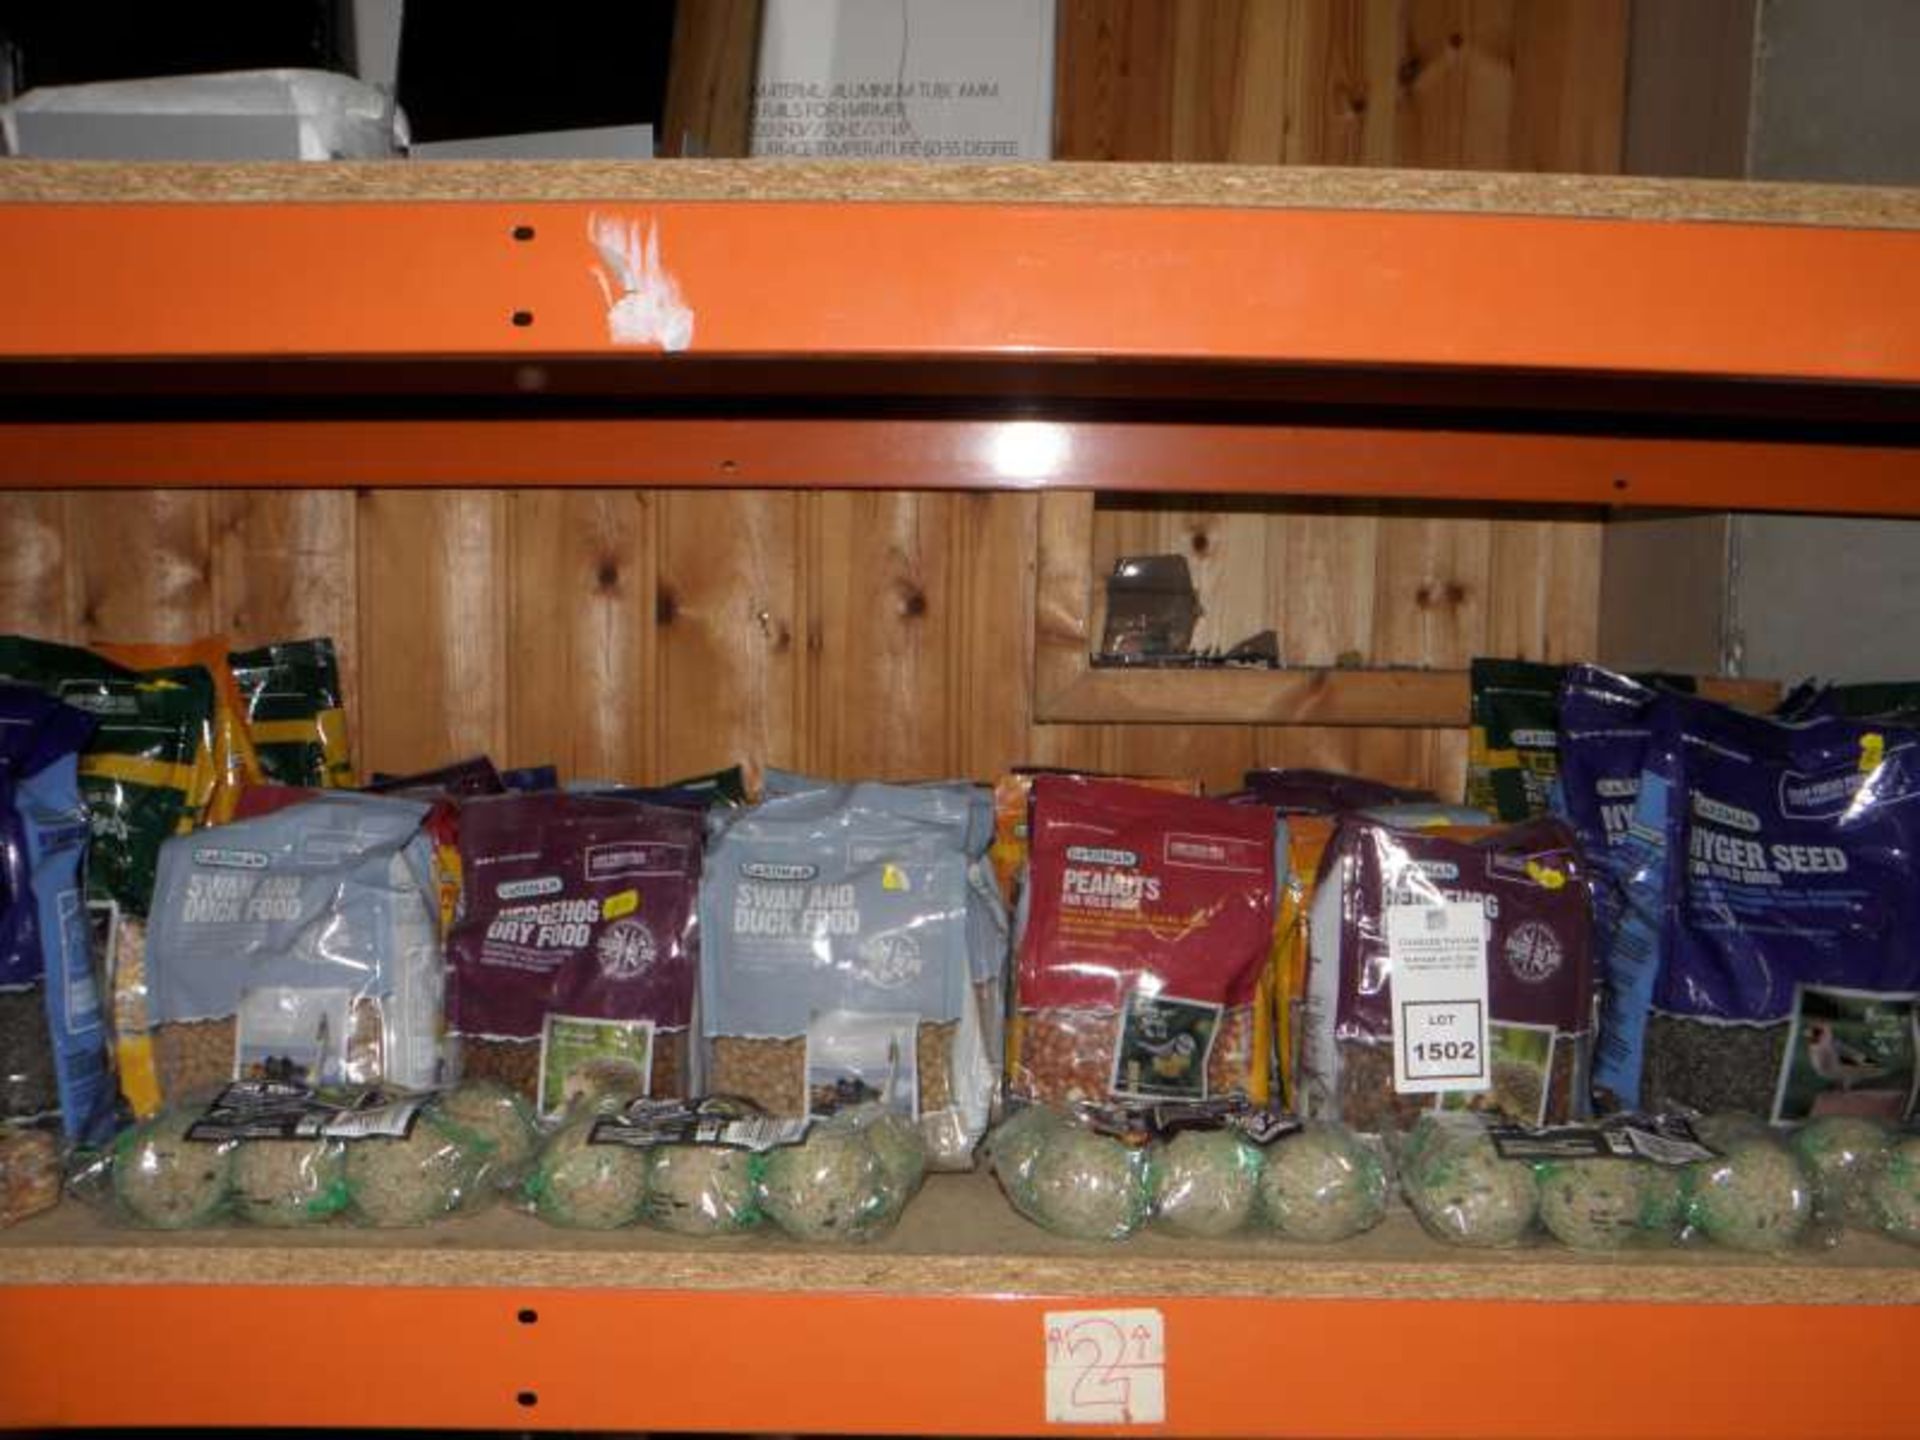 LOT CONTAINING GARDMAN SEED MIX FOR WILD BIRDS, NYGER SEED, HEDGEHOG DRY FOOD, SWAN AND DUCK FOOD,